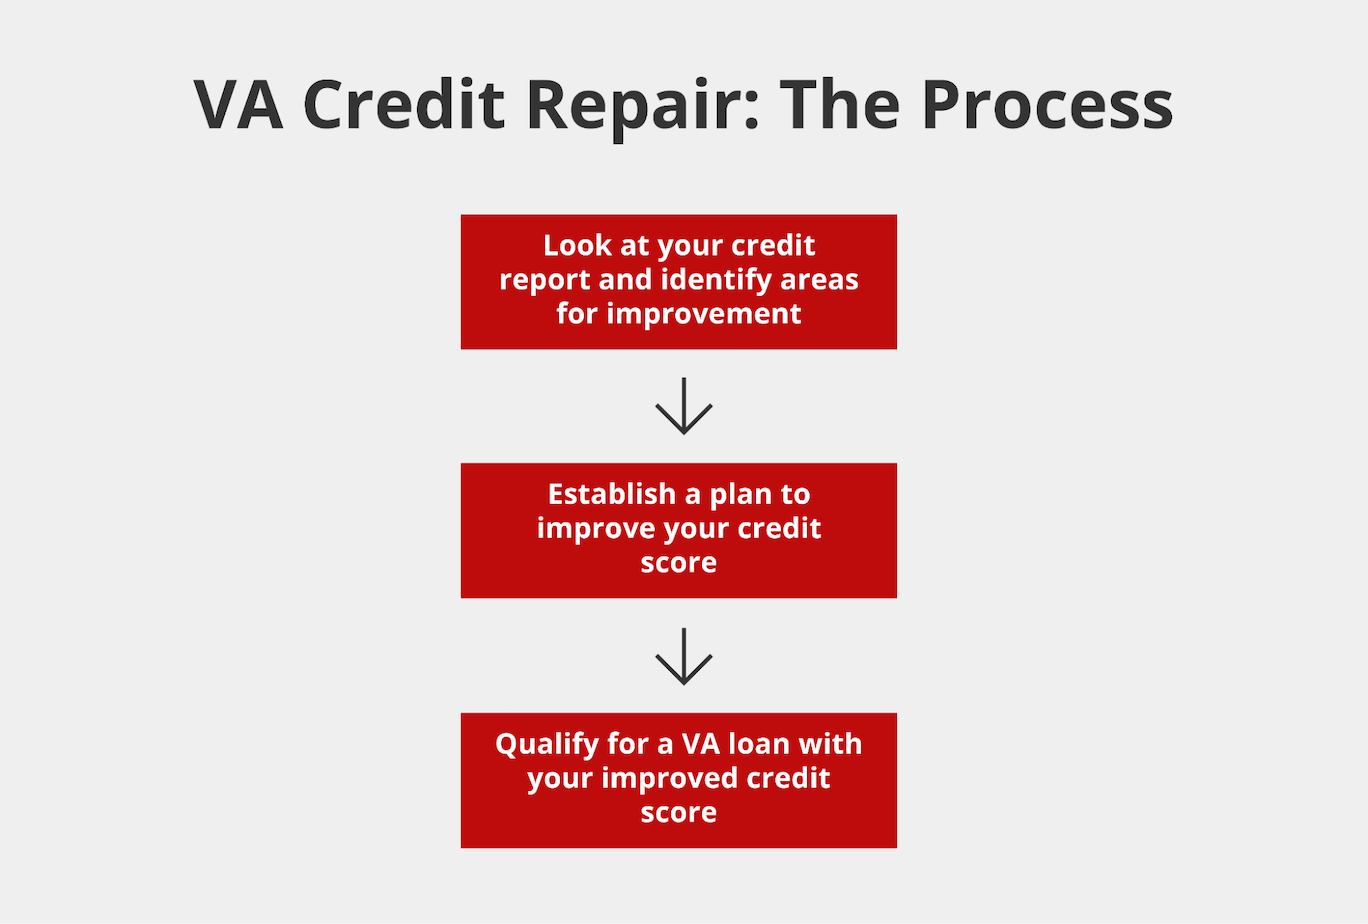 Flow chart with text that reads, “VA Credit Repair: The Process; Look at your credit report and identify areas for improvement; Establish a plan to improve your credit score; Qualify for a VA loan with your improved credit score”.